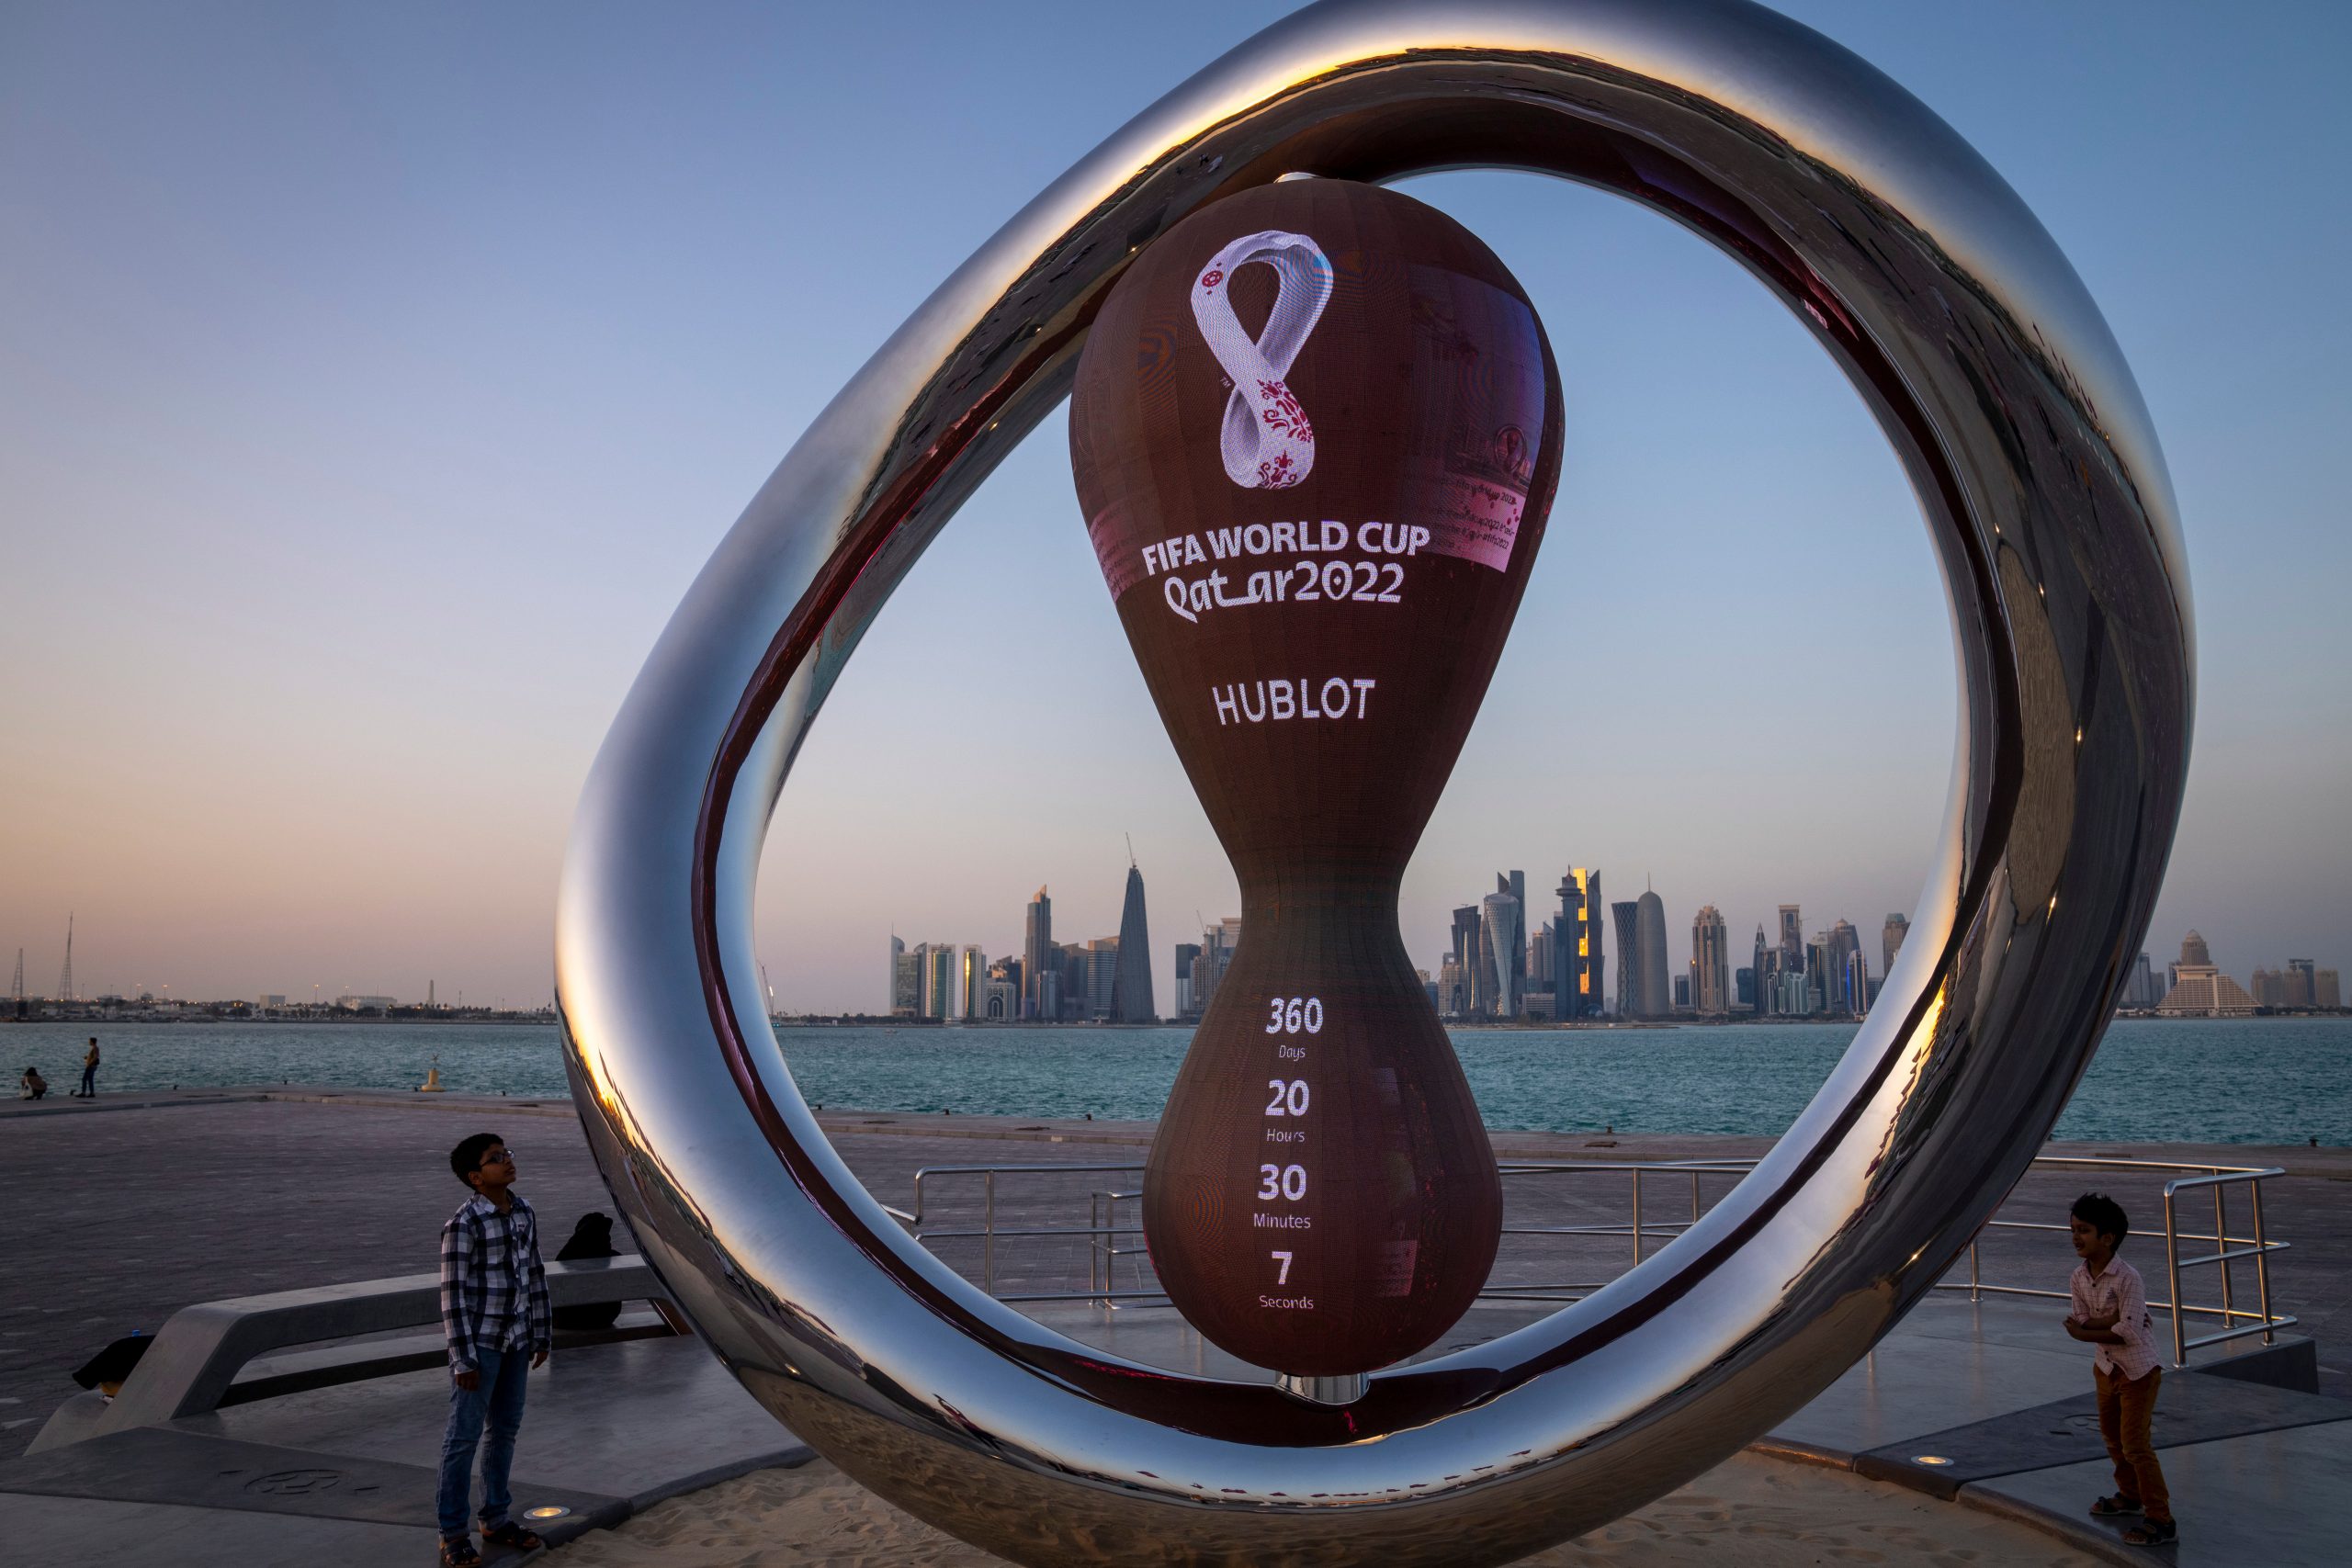 Qatar World Cup 2022 ticket sales to open, starting at $70